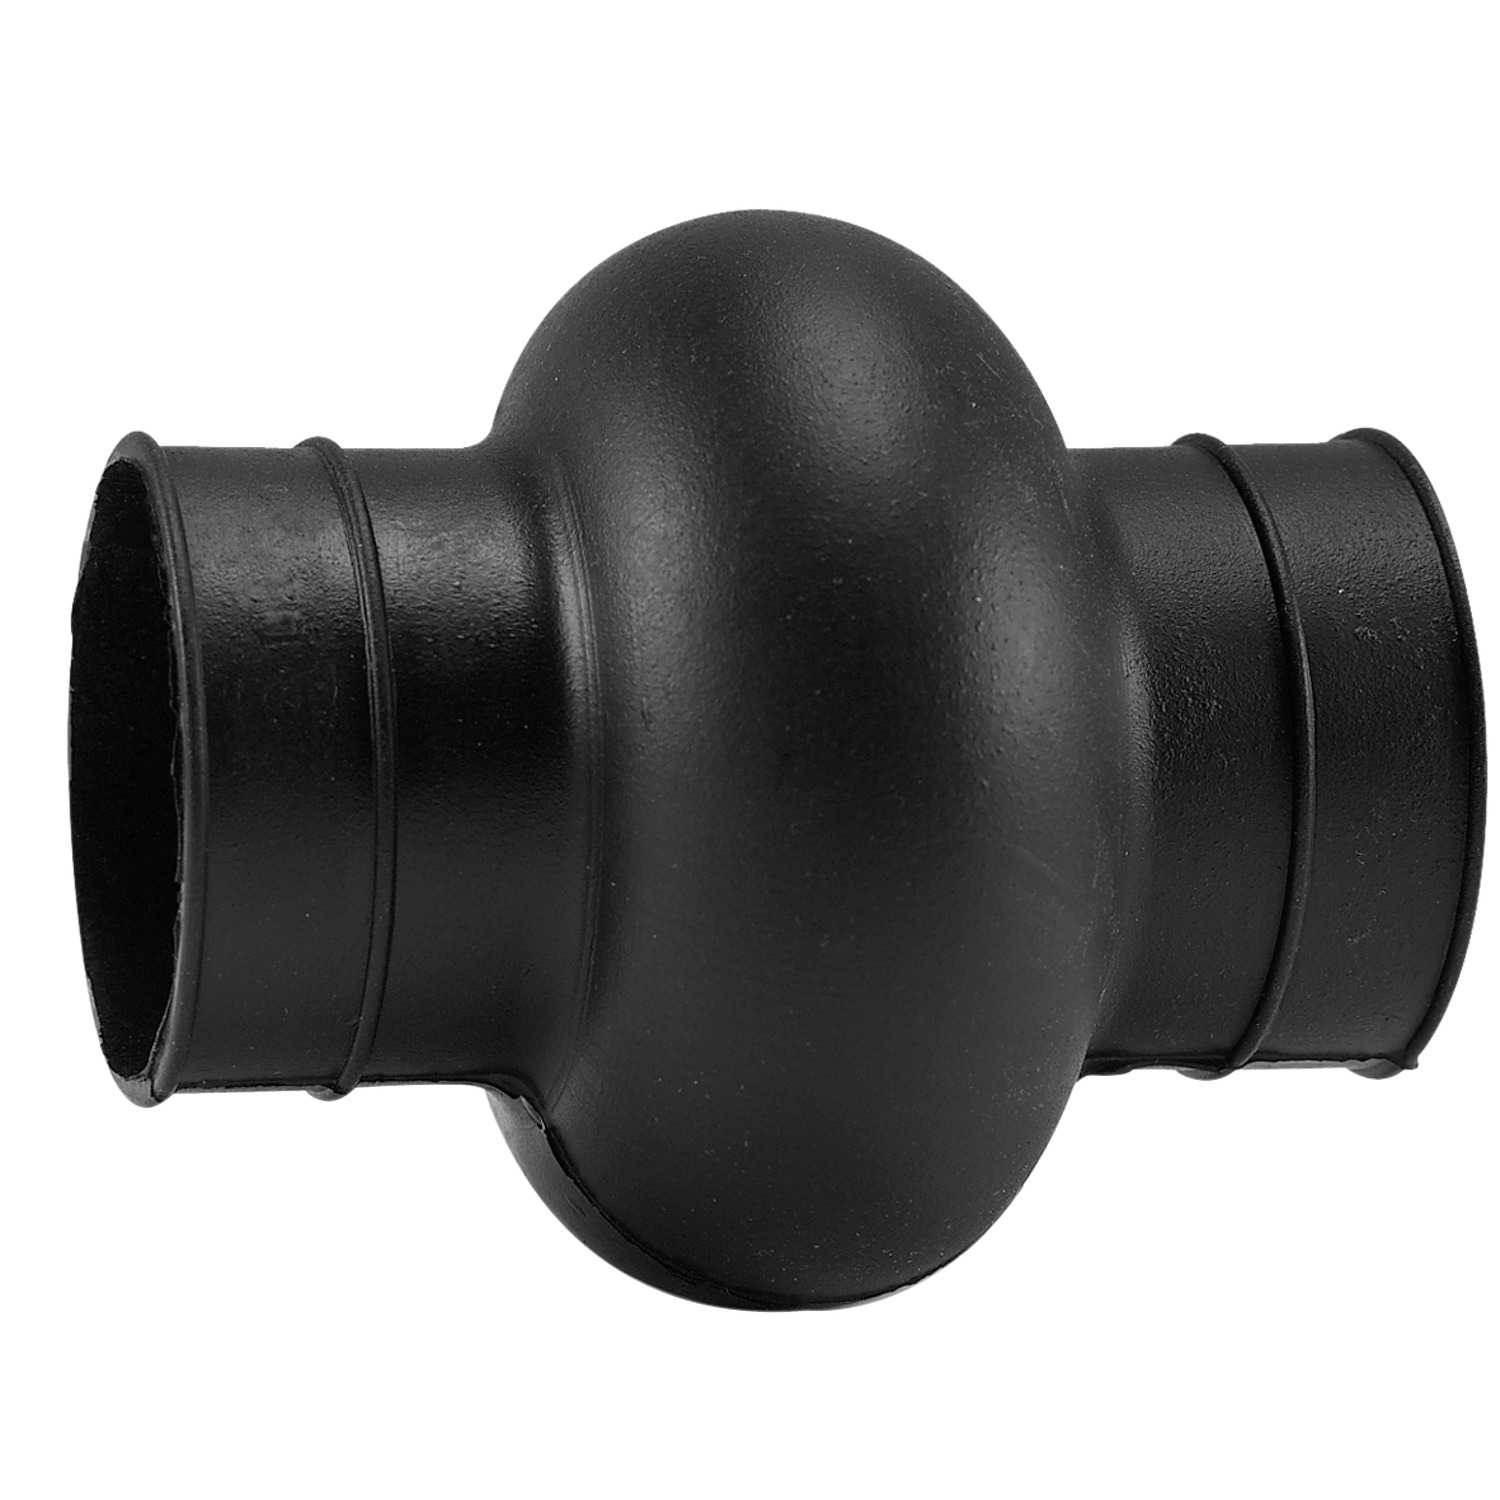 Bellows Bellows for single and double universal joints. Made from black elastomer plastic. Gives universal joints full protections against ingress of dirt.